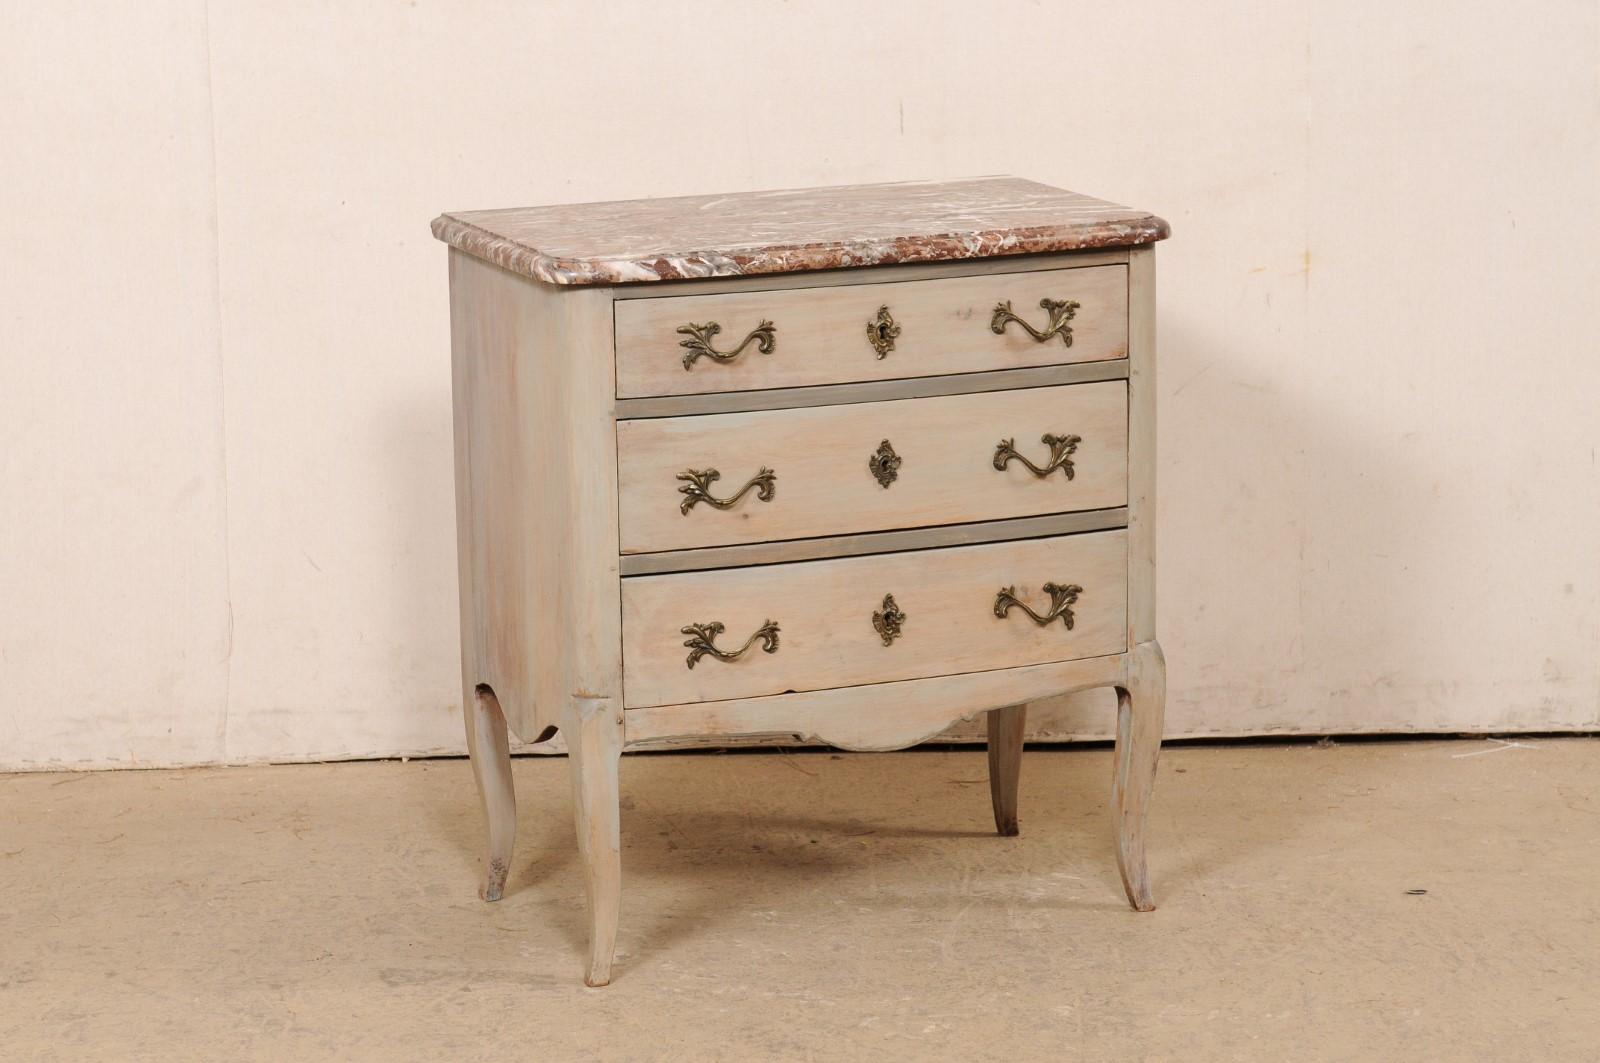 A French small-sized commode with original marble top, from the 19th century. This antique raised chest from France features a beautiful marble top with softly-rounded edges and front corners, which rests atop a case with smoothly-rounded side posts